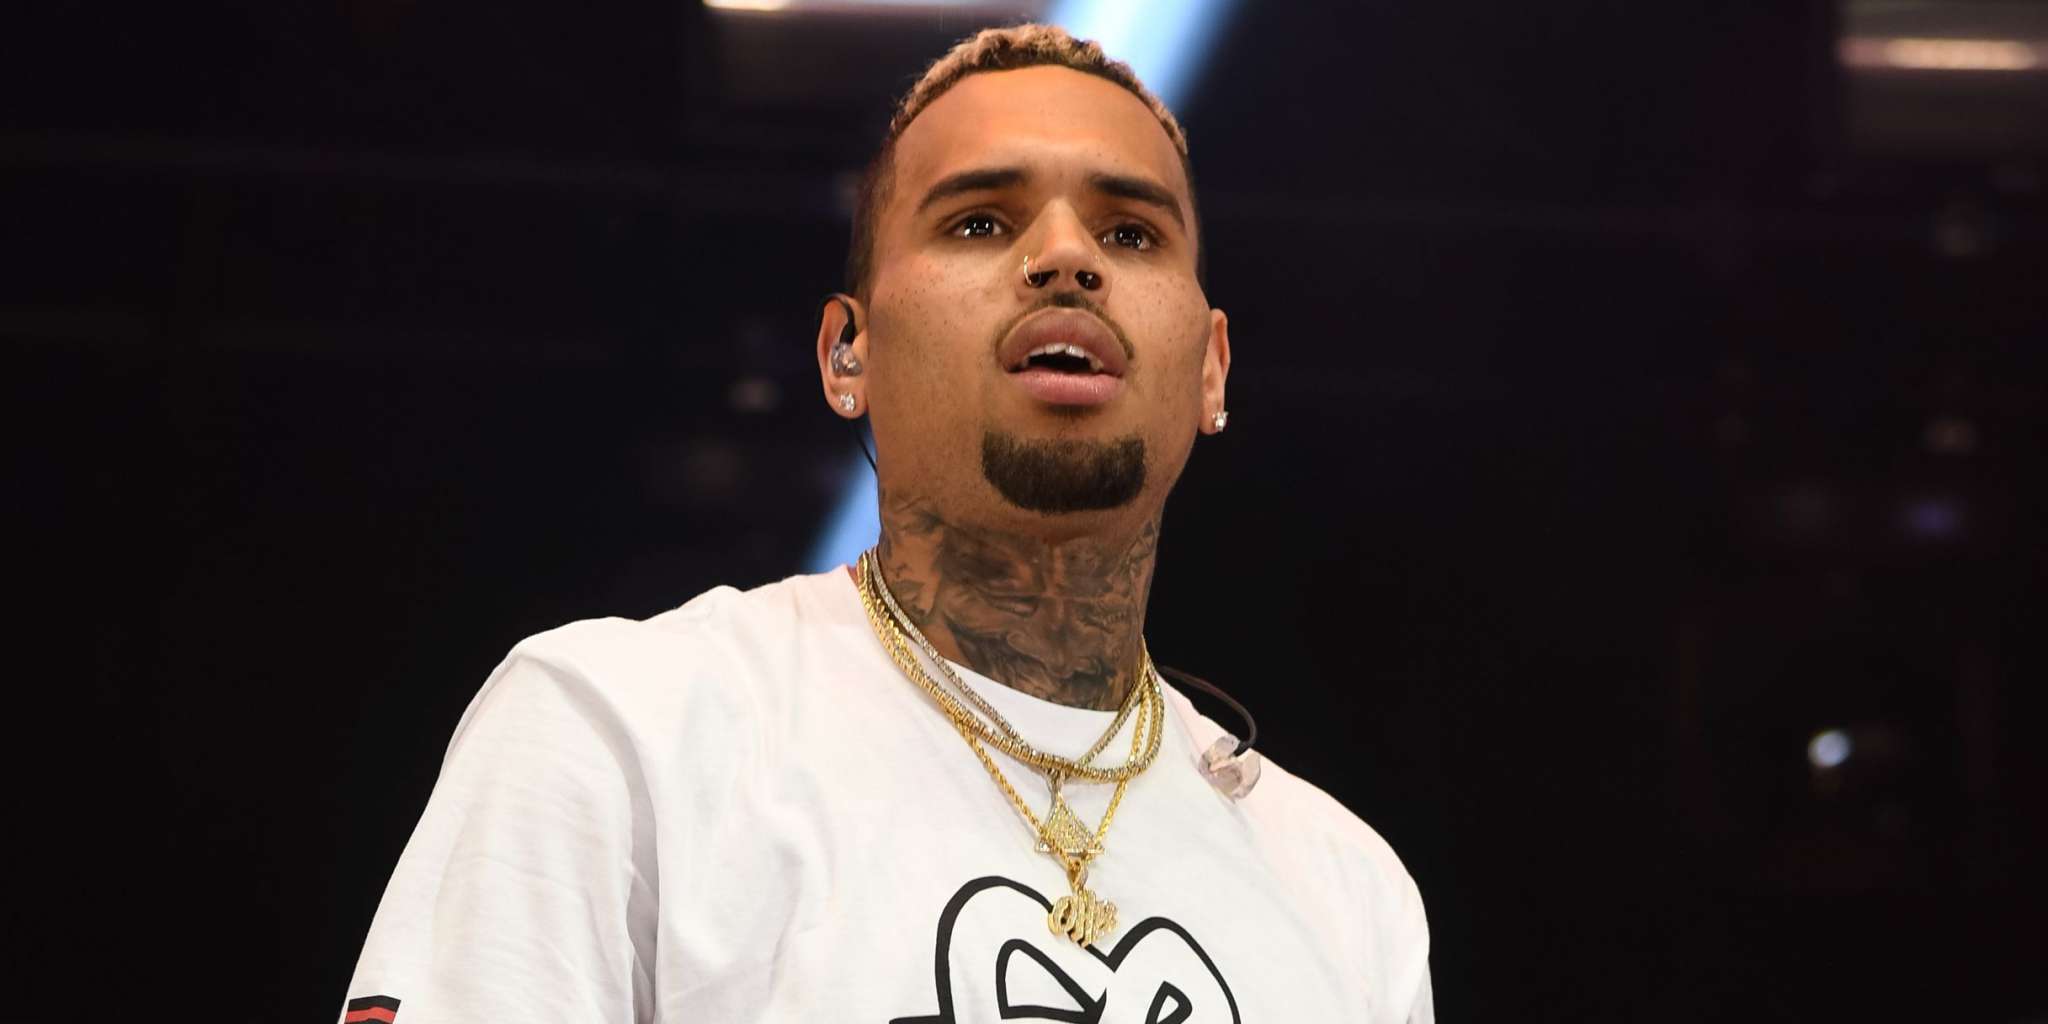 Chris Brown Receives A Visit From The Police After Leaking His Home Address